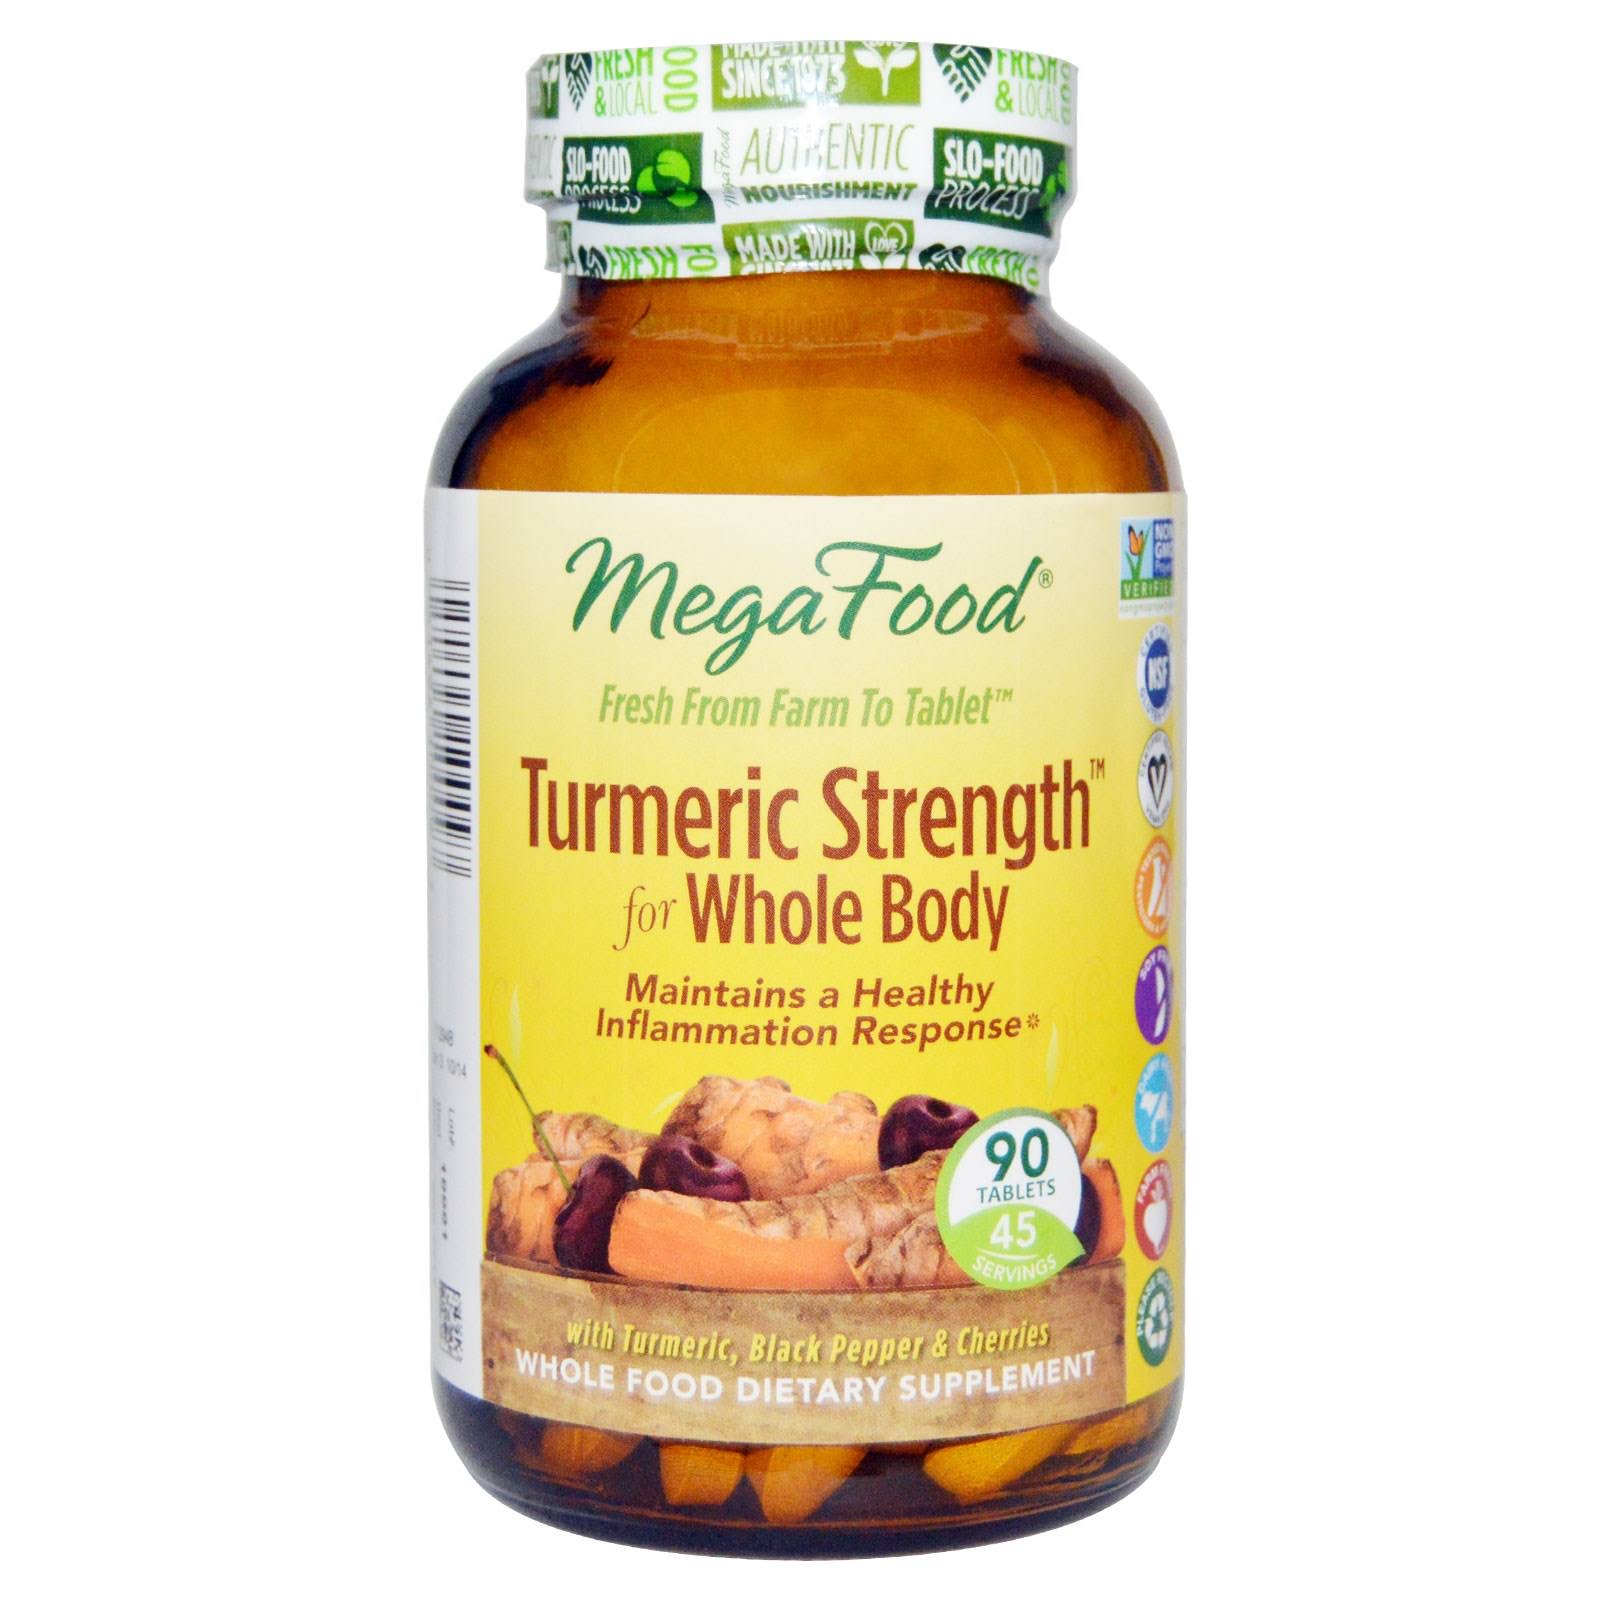 MegaFood Turmeric Strength for Whole Body Dietary Supplement - 90 Tablets